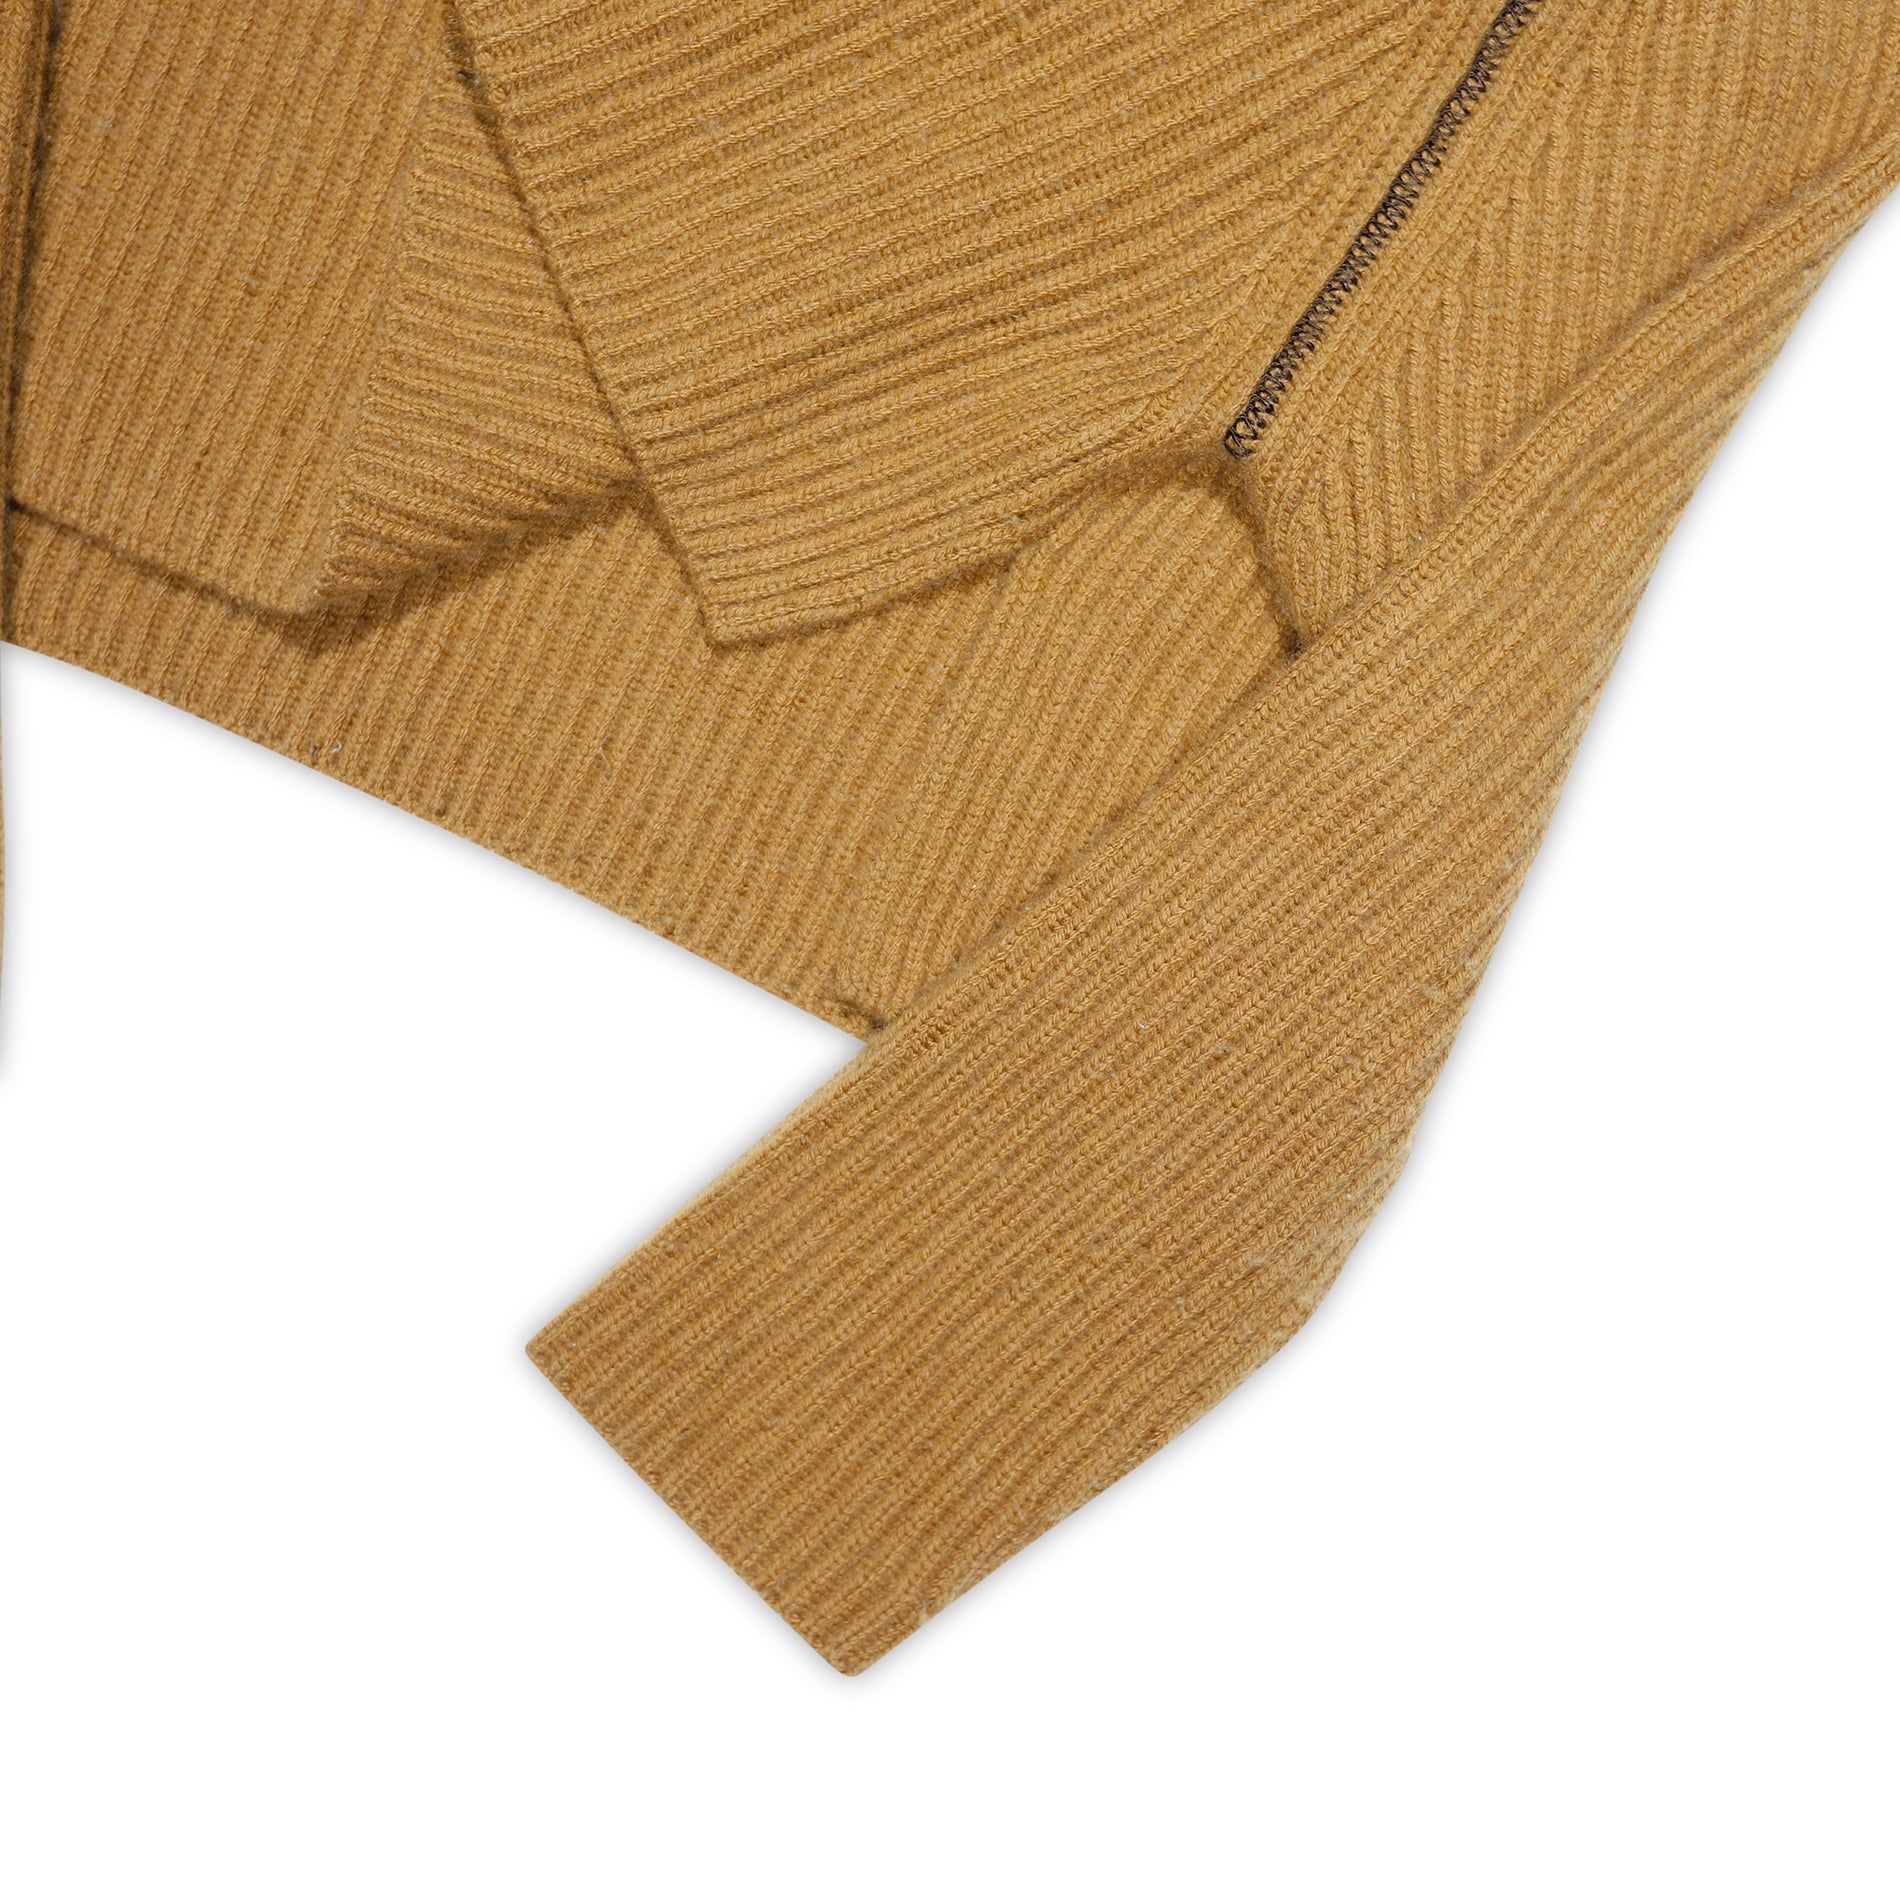 Celine by Phoebe Philo Cropped Brown Chunky Cashmere Knit